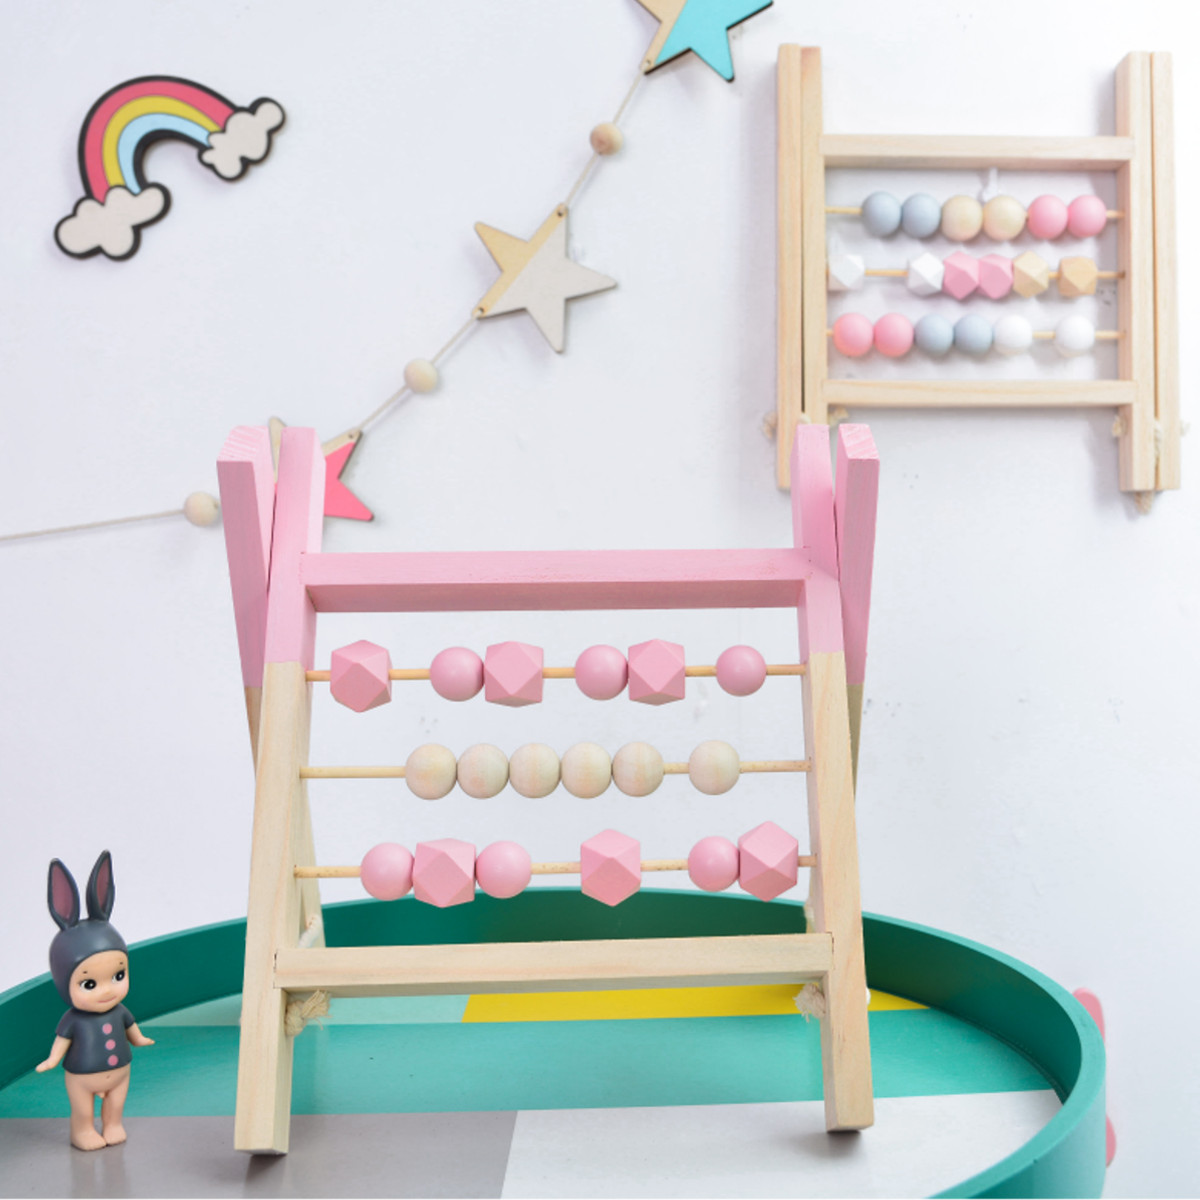 Natural-Pine-Nordic-Baby-Room-Decor-Wooden-Abacus-Educational-Nursery-Props-Toys-1581036-7